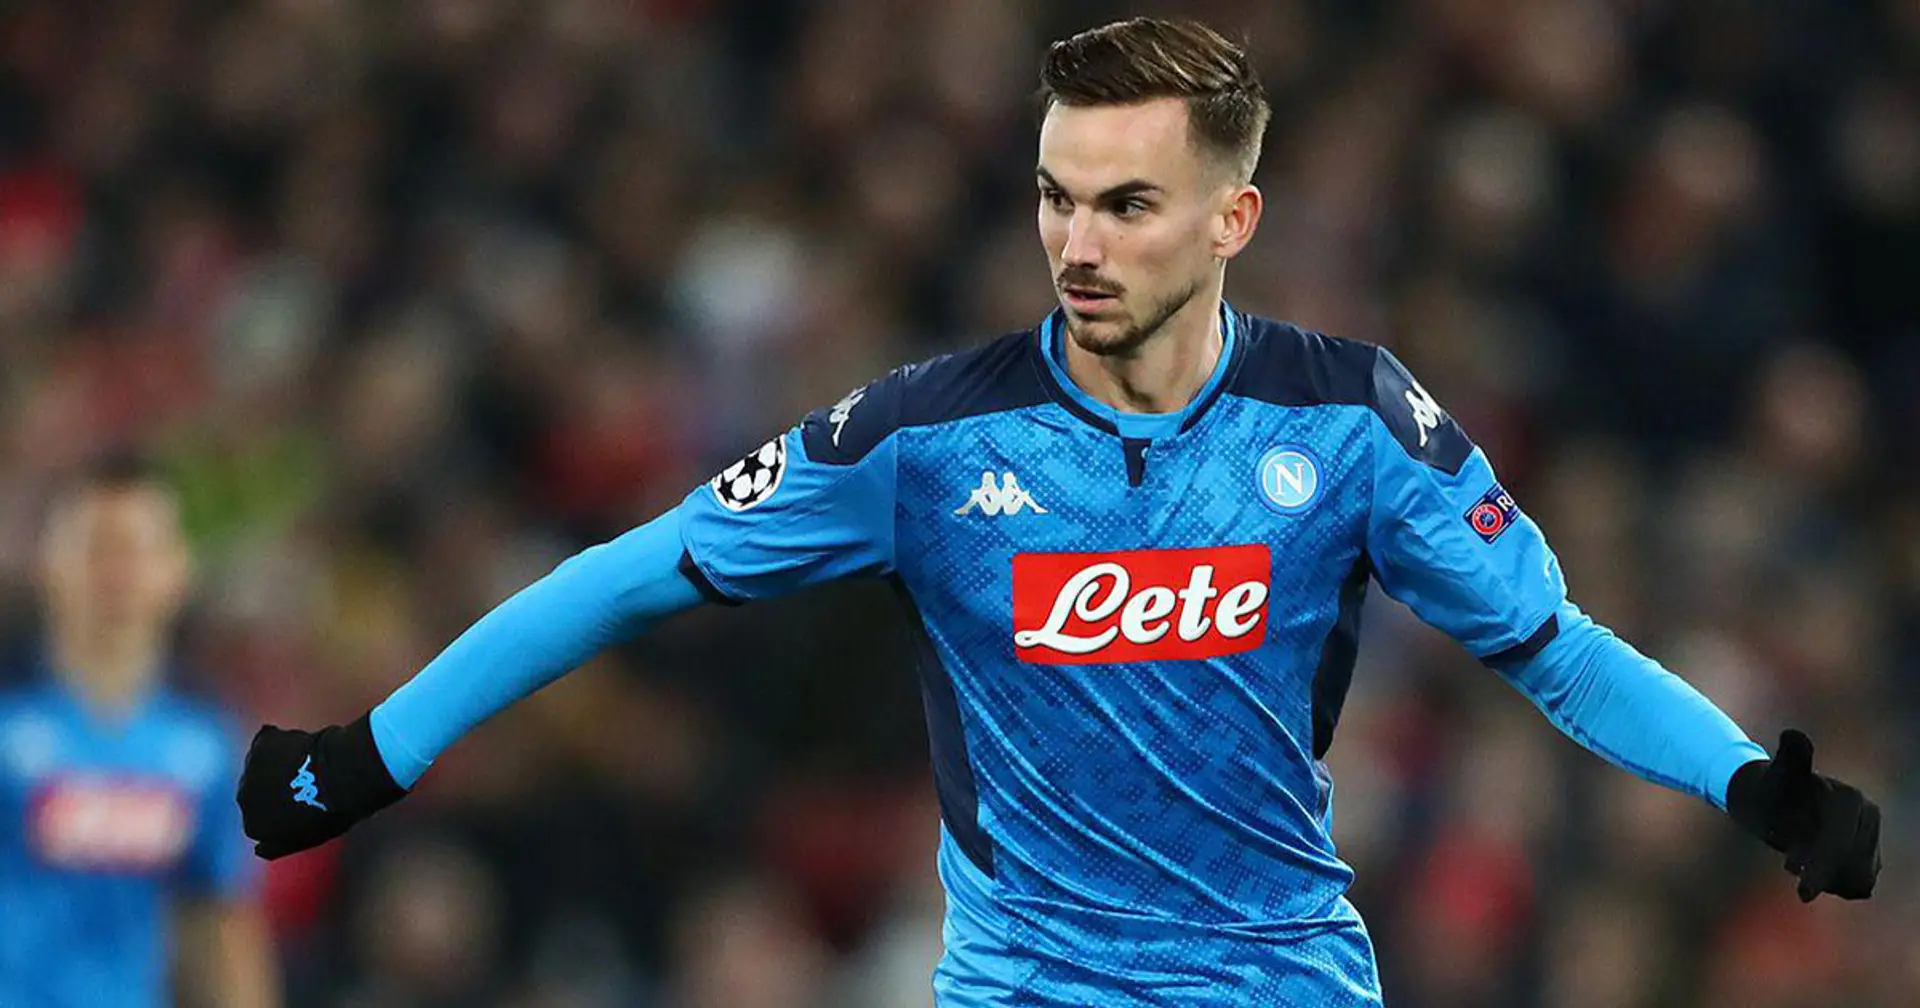 Liverpool reportedly monitoring Napoli's DM Fabian Ruiz, agent confirms interest from 'several big clubs'